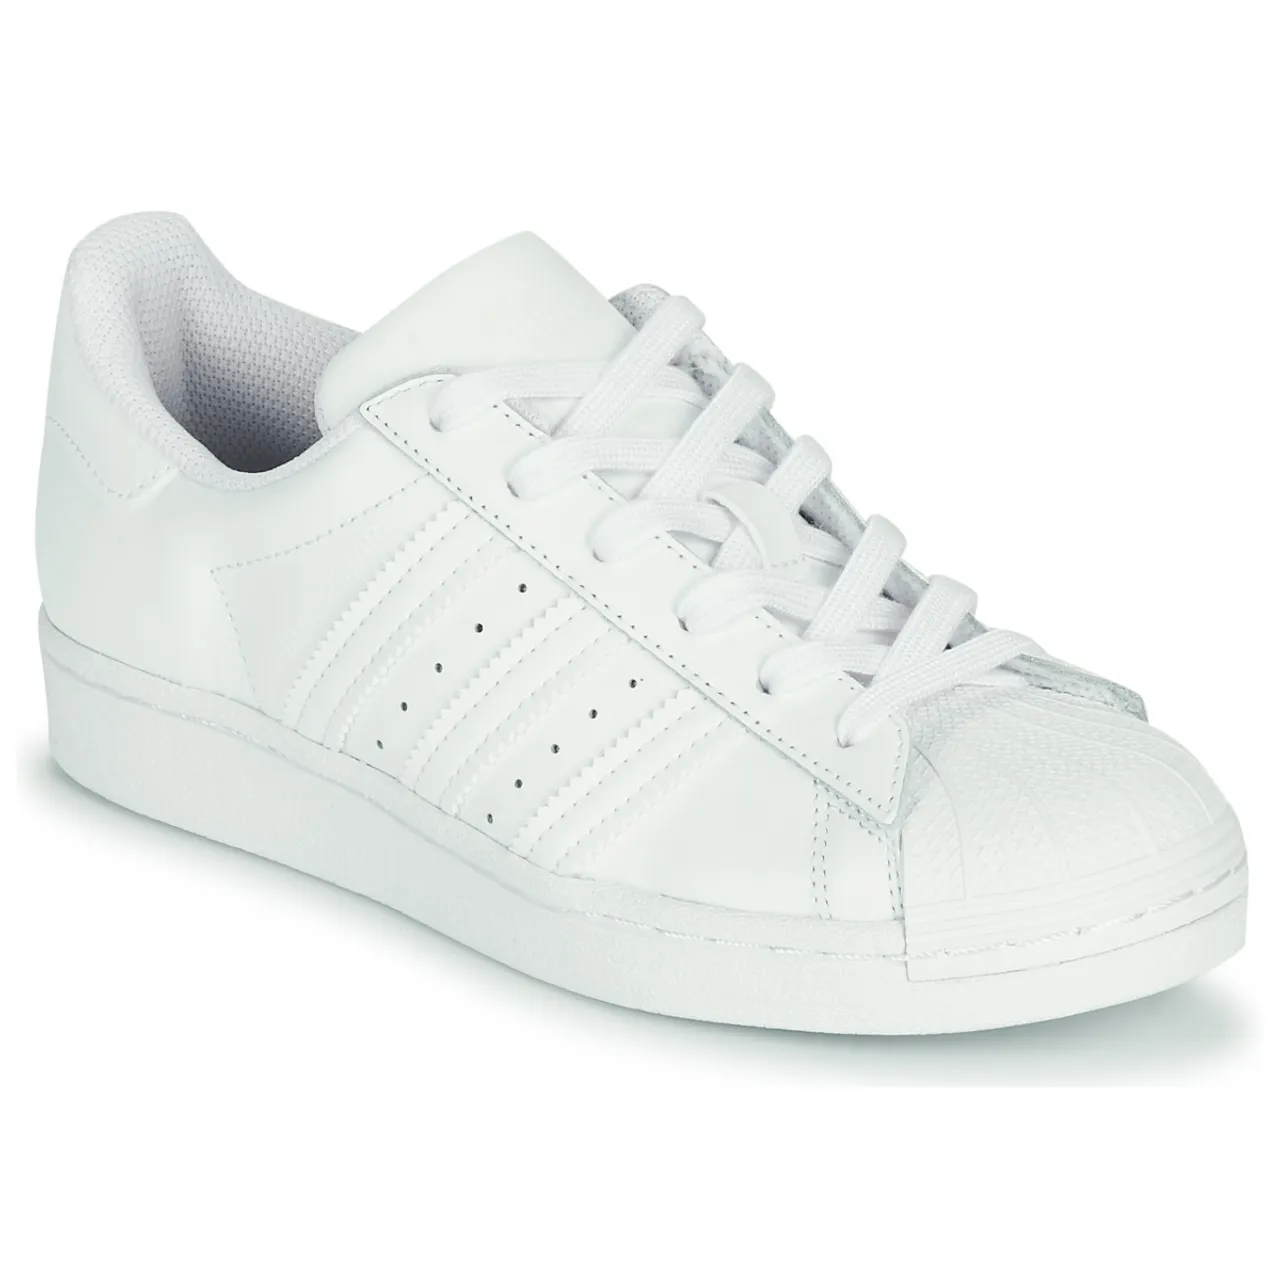 adidas  SUPERSTAR J  boys's Children's Shoes (Trainers) in White